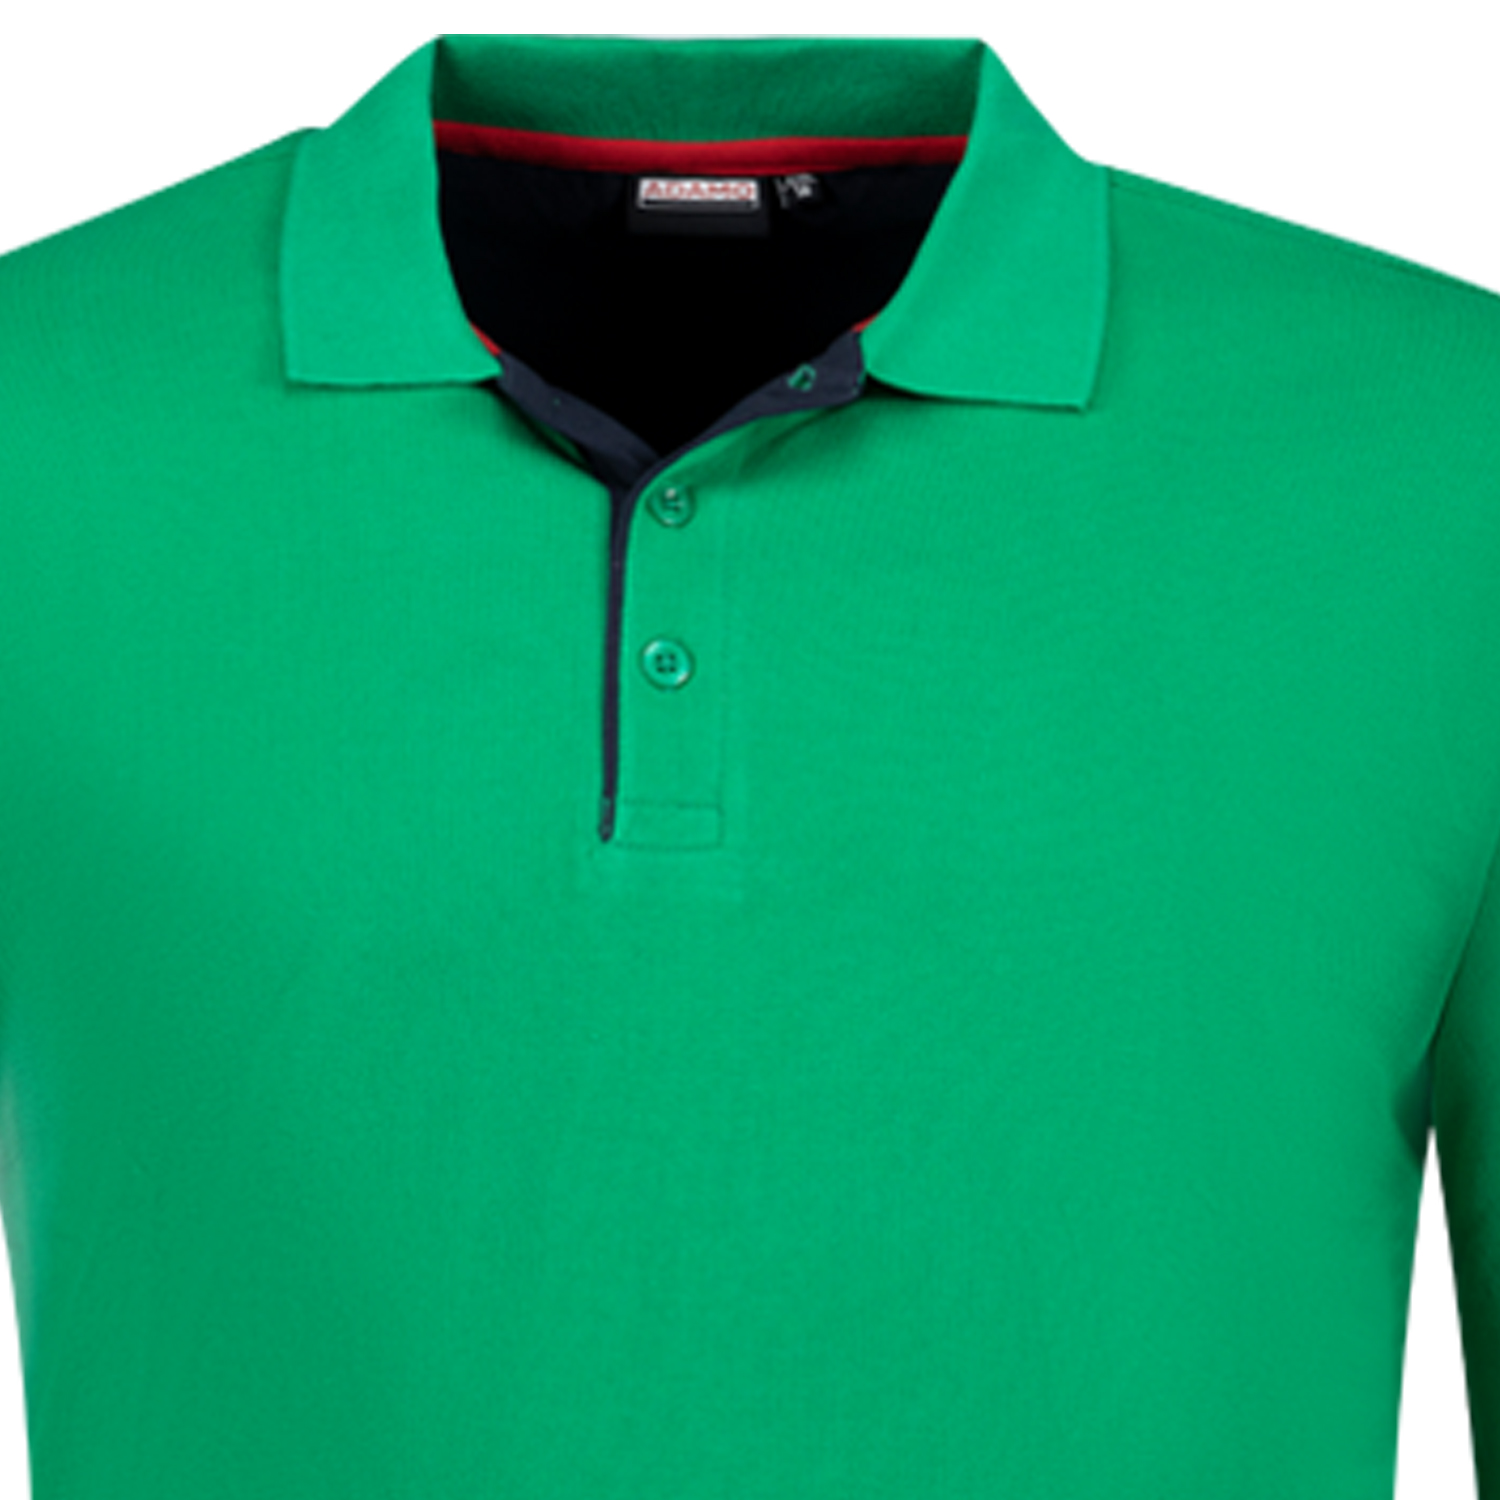 Long sleeve polo shirt COMFORT FIT in green serie Peter by Adamo up to oversize 12XL